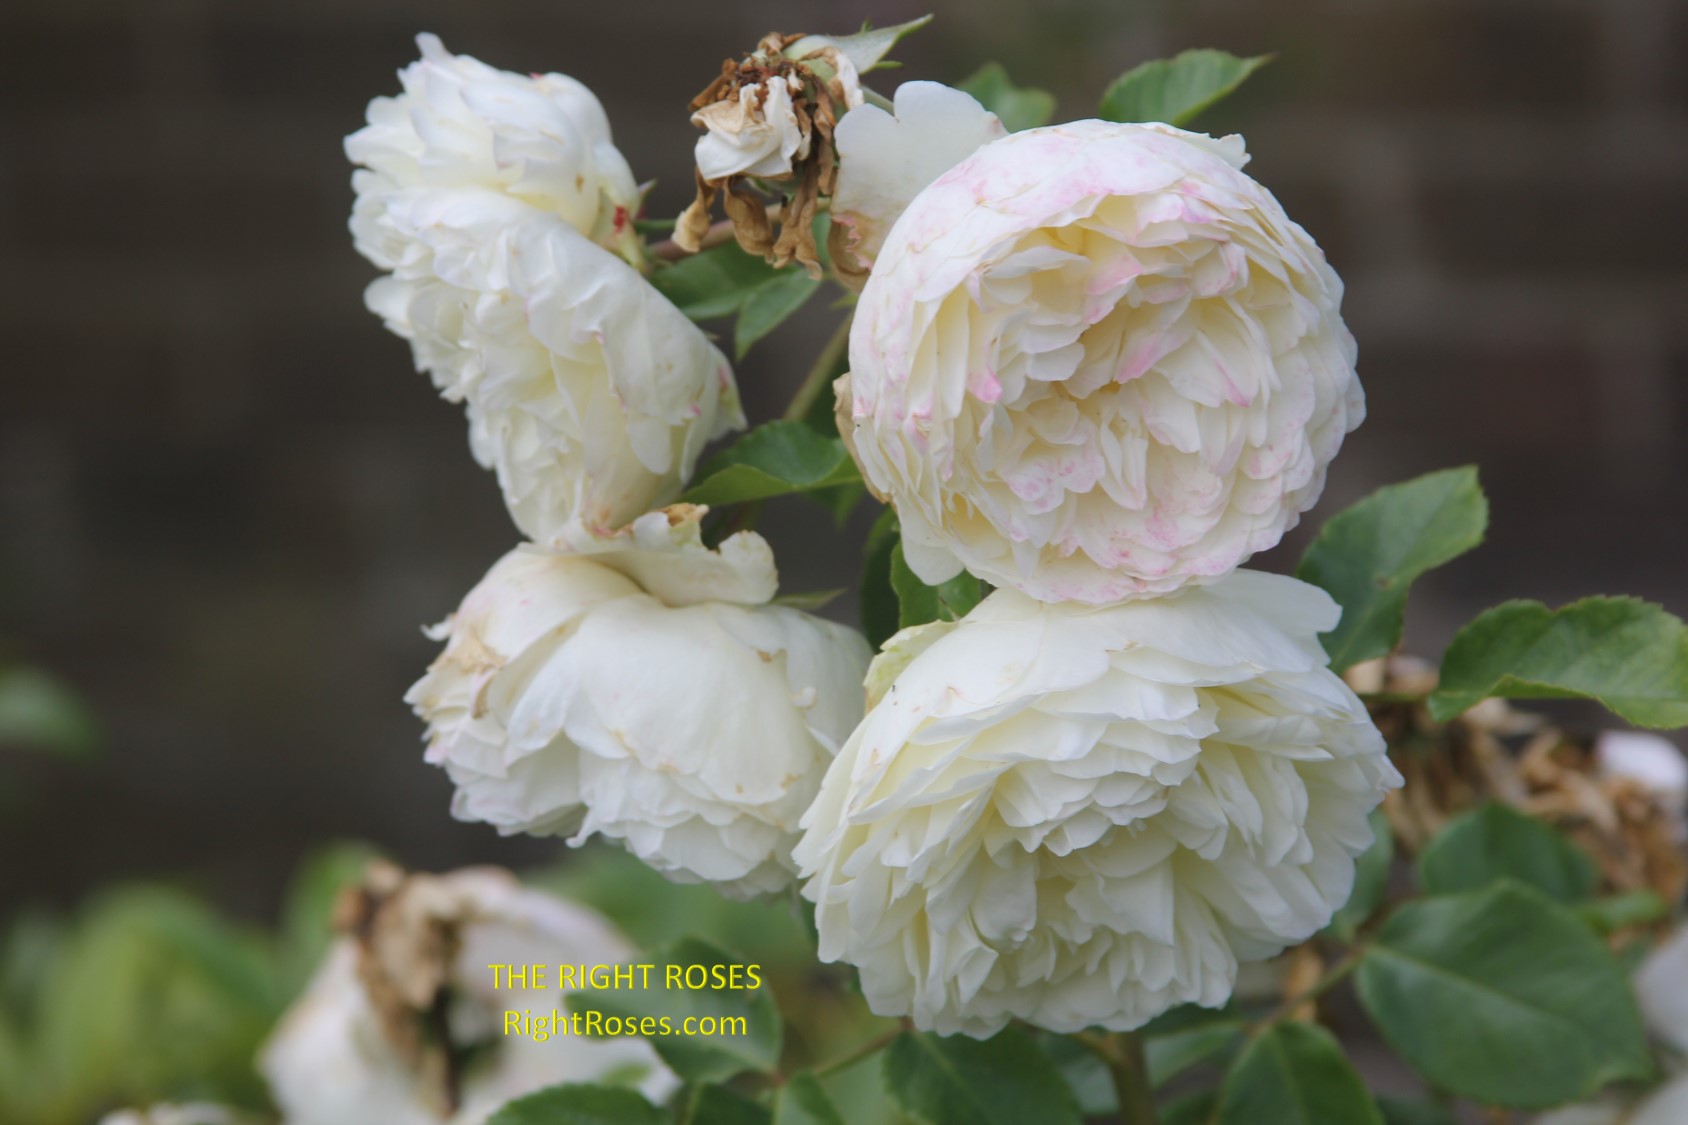 Tranquillity rose review the right roses score best top garden store david austin english roses rose products rose rating the right leap rose food fertilizer